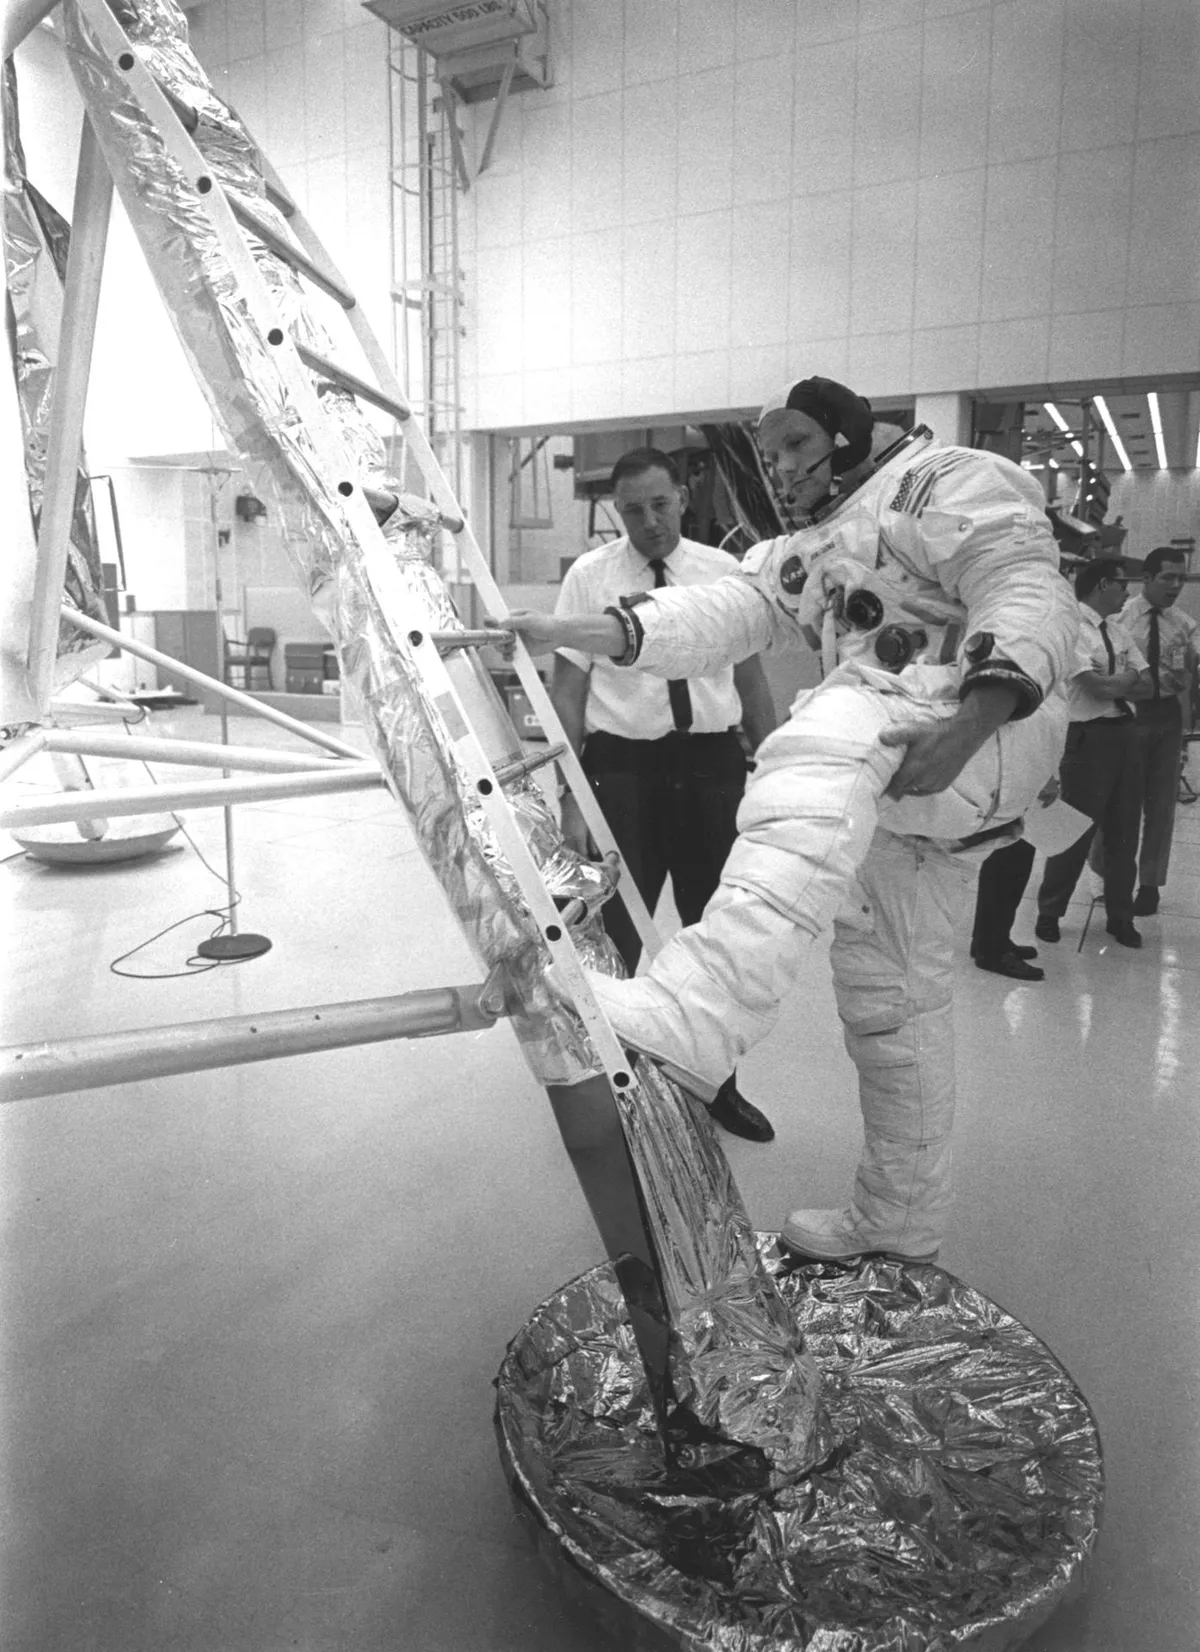 No small step,9 July 1969. When planning to land on the Moon, NASA were not sure how deep the Moon dust would be. There was a possibility that when Neil Armstrong took his first step he might sink irretrievably. Training sessions prepared him for a big step back onto the Lunar Module ladder.Credit: NASA